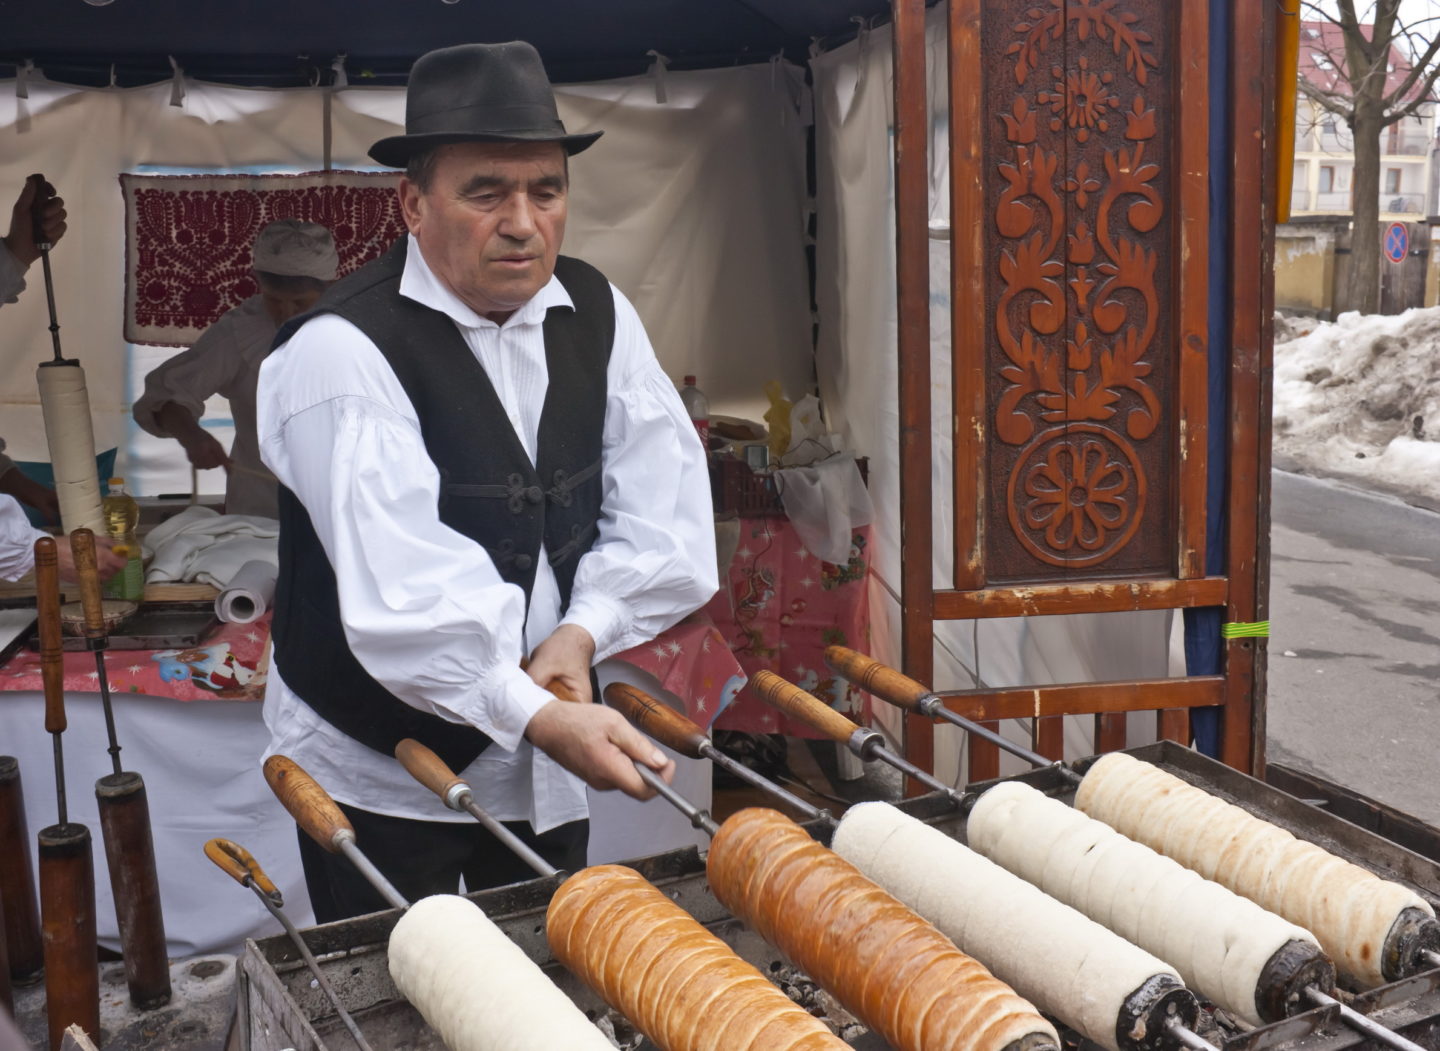 Baker makes traditional Hungarian cakes at the Carnival of the Burial of Winters.